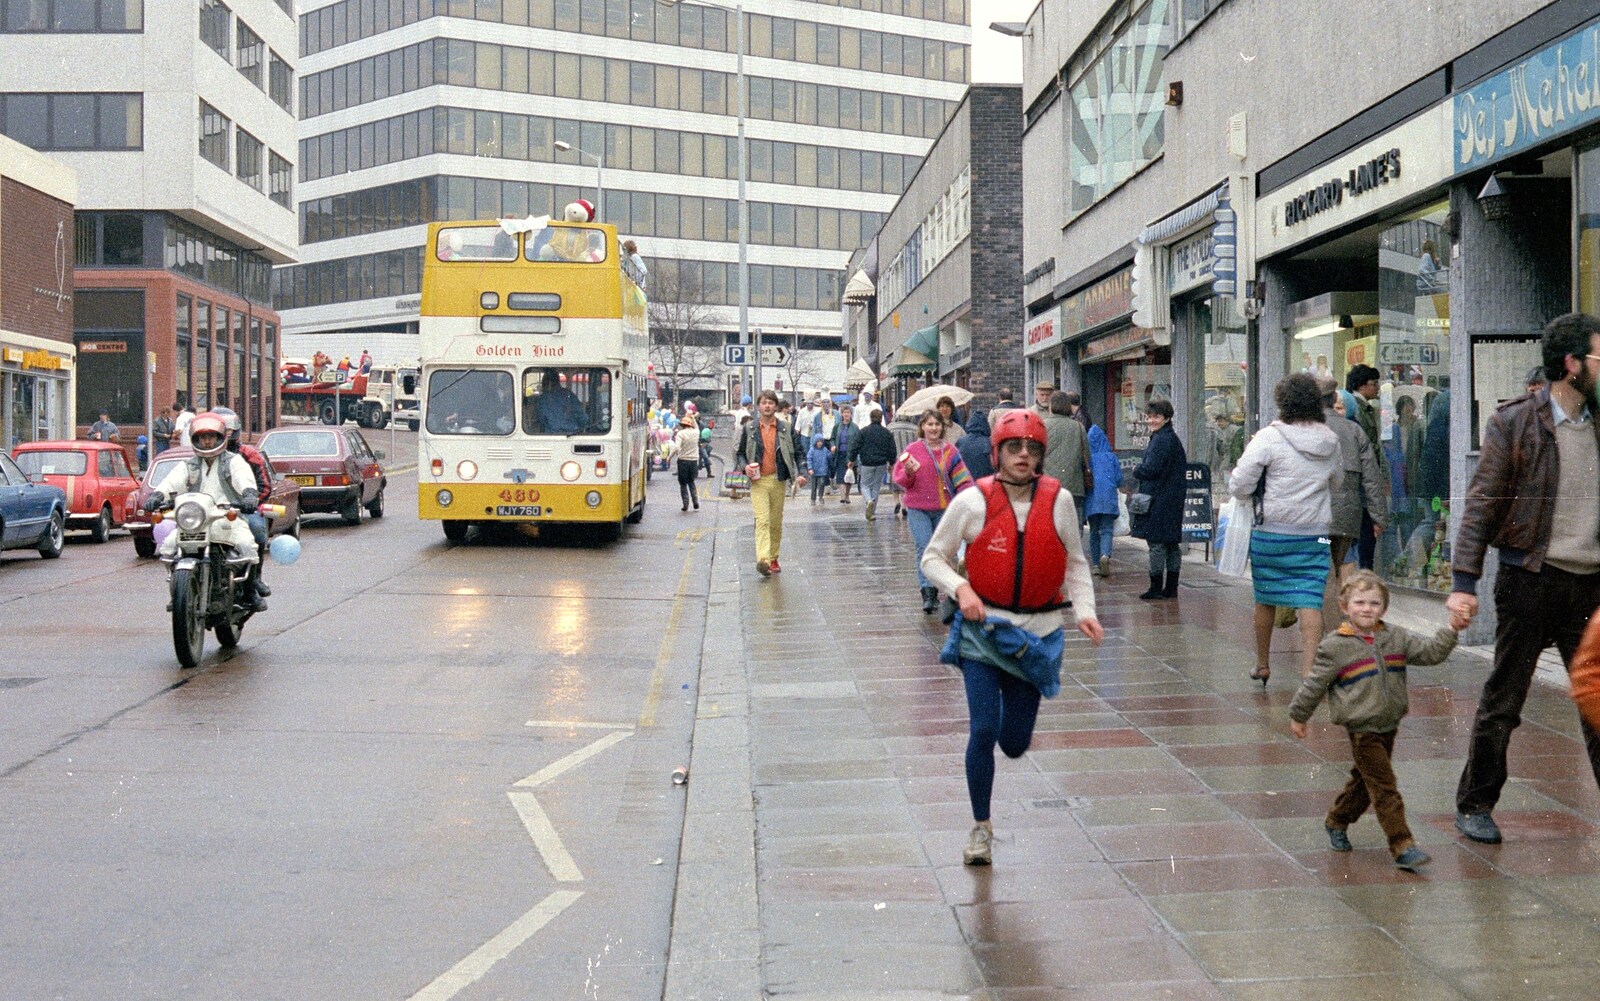 The Golden Hind bus comes down Mayflower Street from Uni: The PPSU Pirate RAG Parade, Plymouth, Devon - 14th February 1987